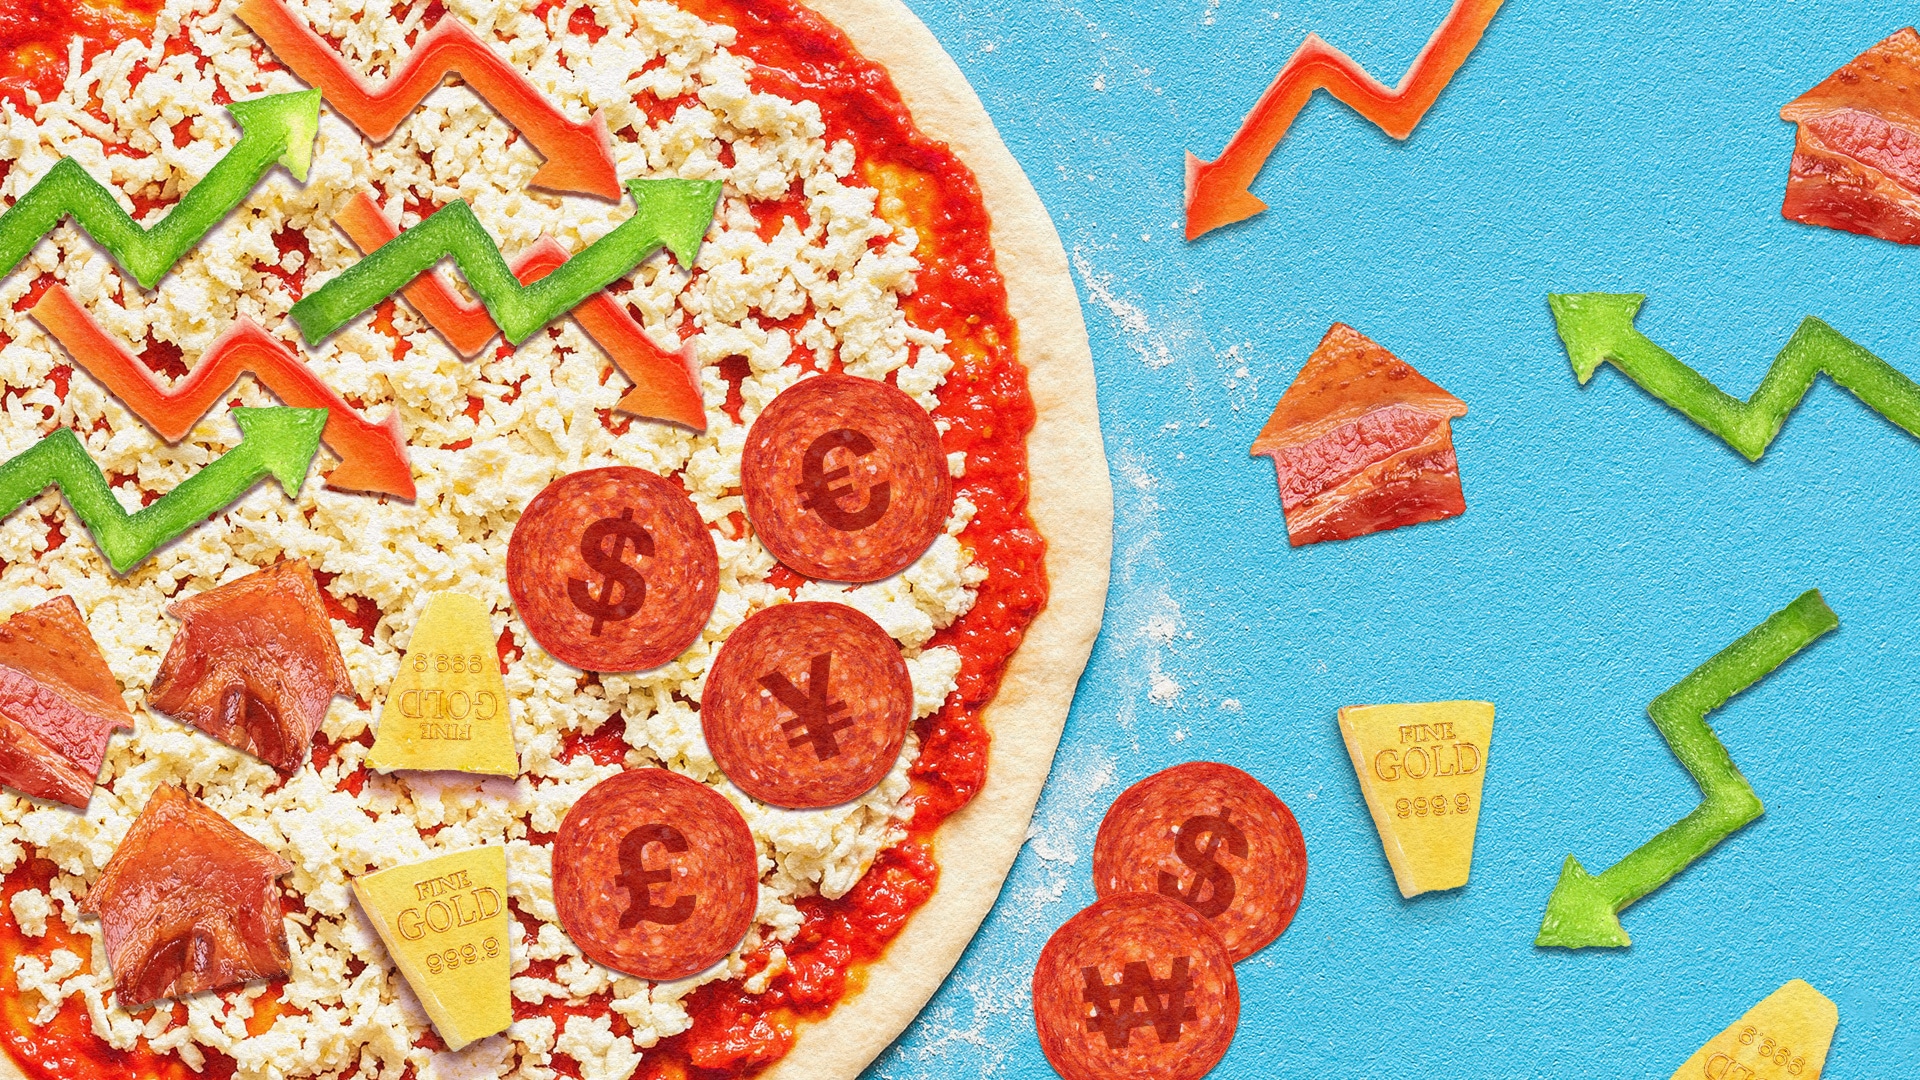 Illustration of a pizza being prepared. The toppings resemble stock market charts, gold bars, houses and coins.